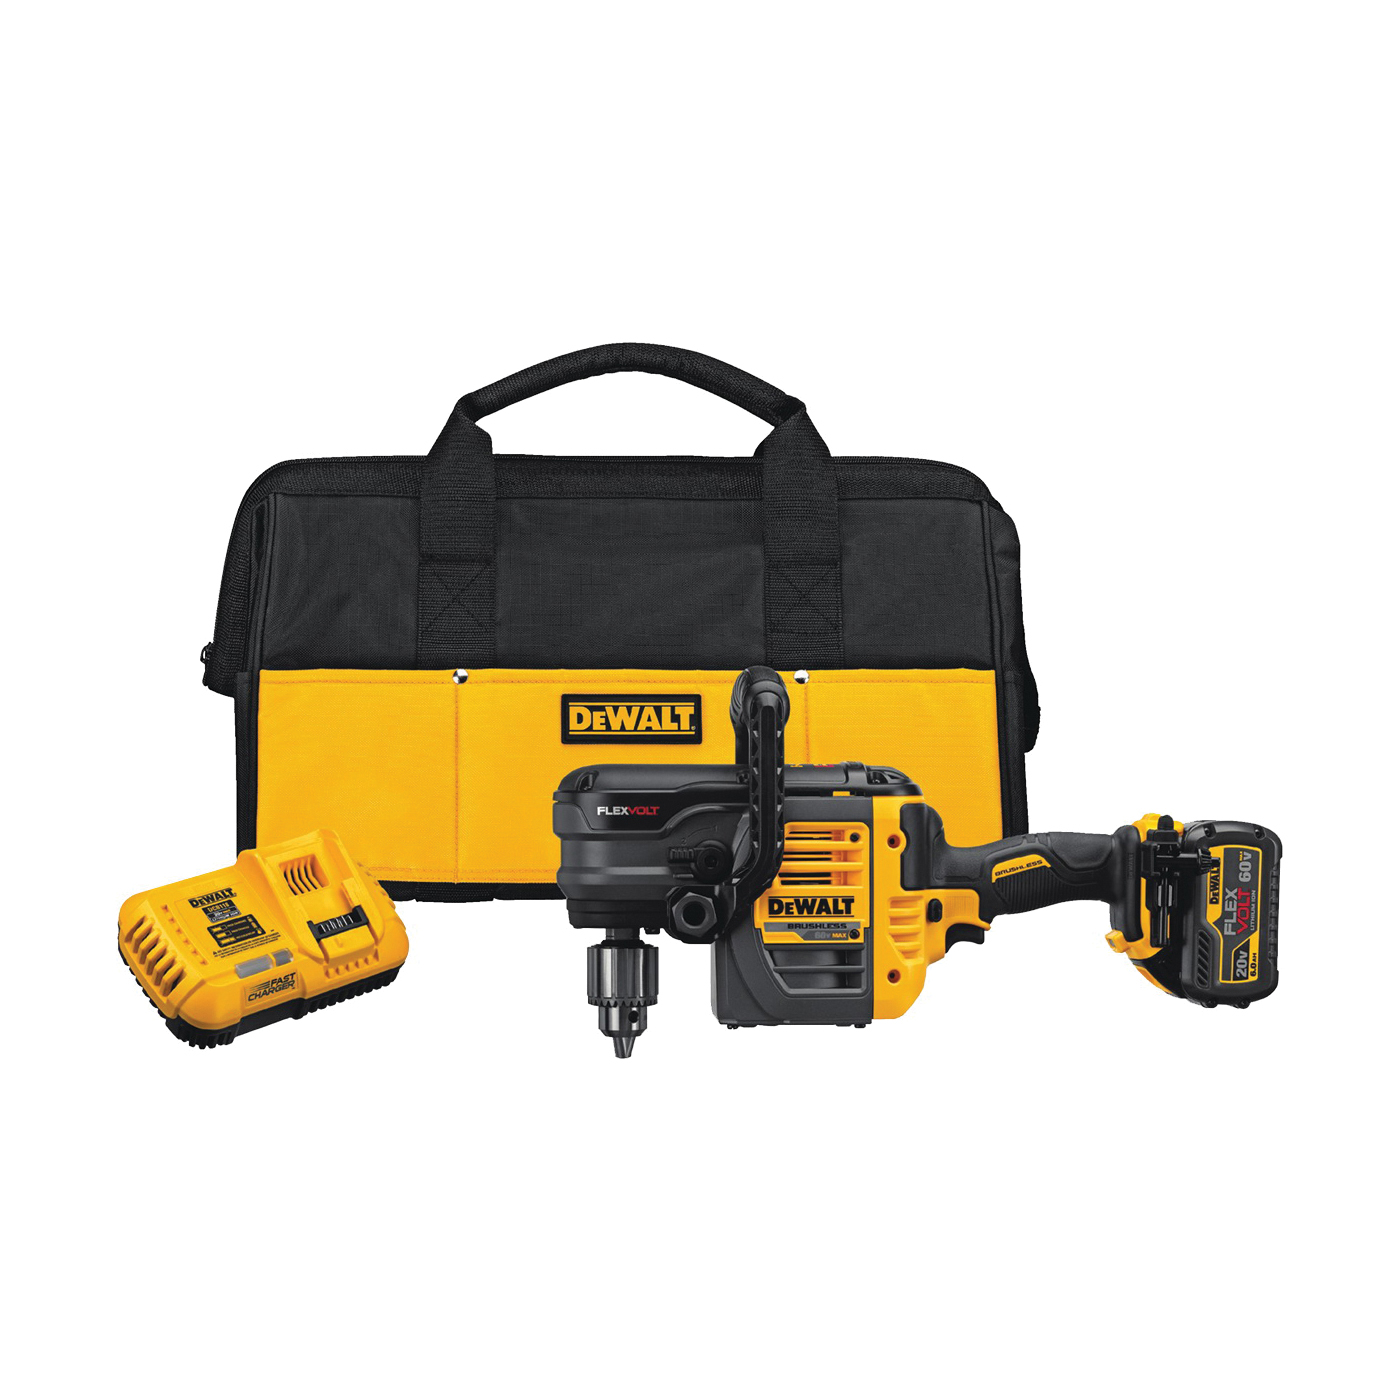 DeWALT DCD460T1 Stud and Joist Drill Kit, Battery Included, 60 V, 1/2 in Chuck, Keyed Chuck